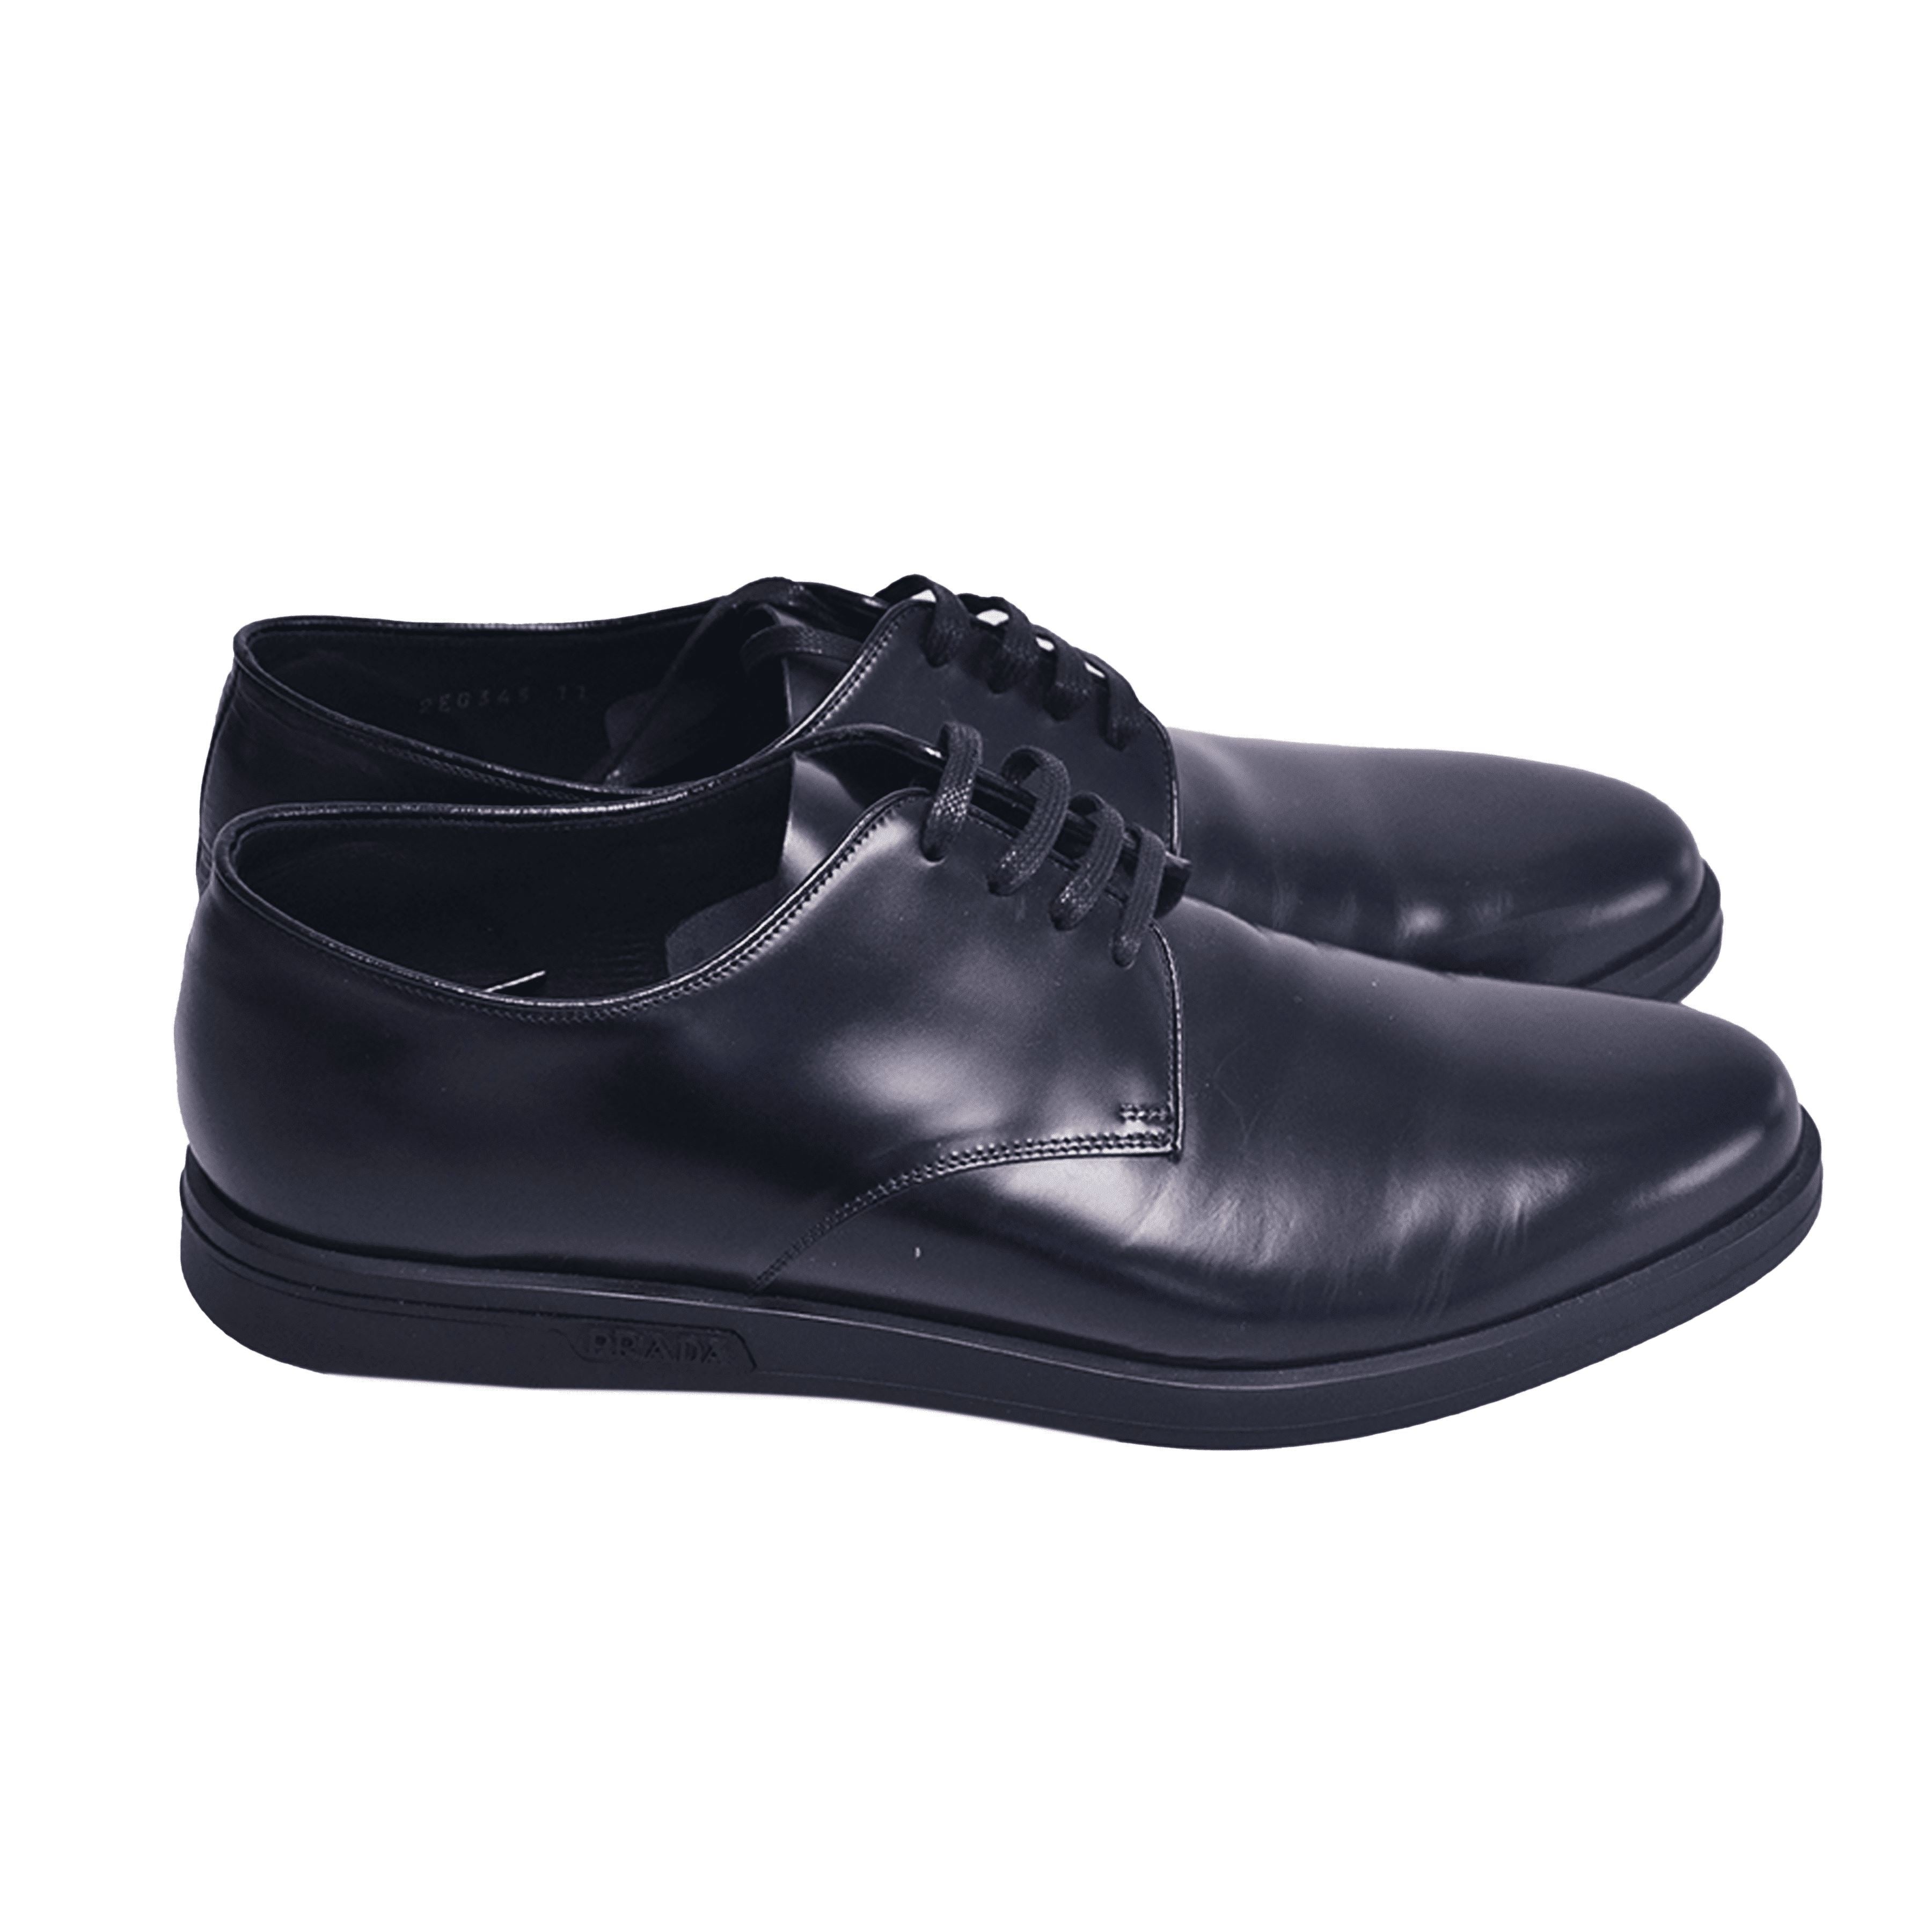 Black Brushed Leather Derby Shoes Shoes Prada 